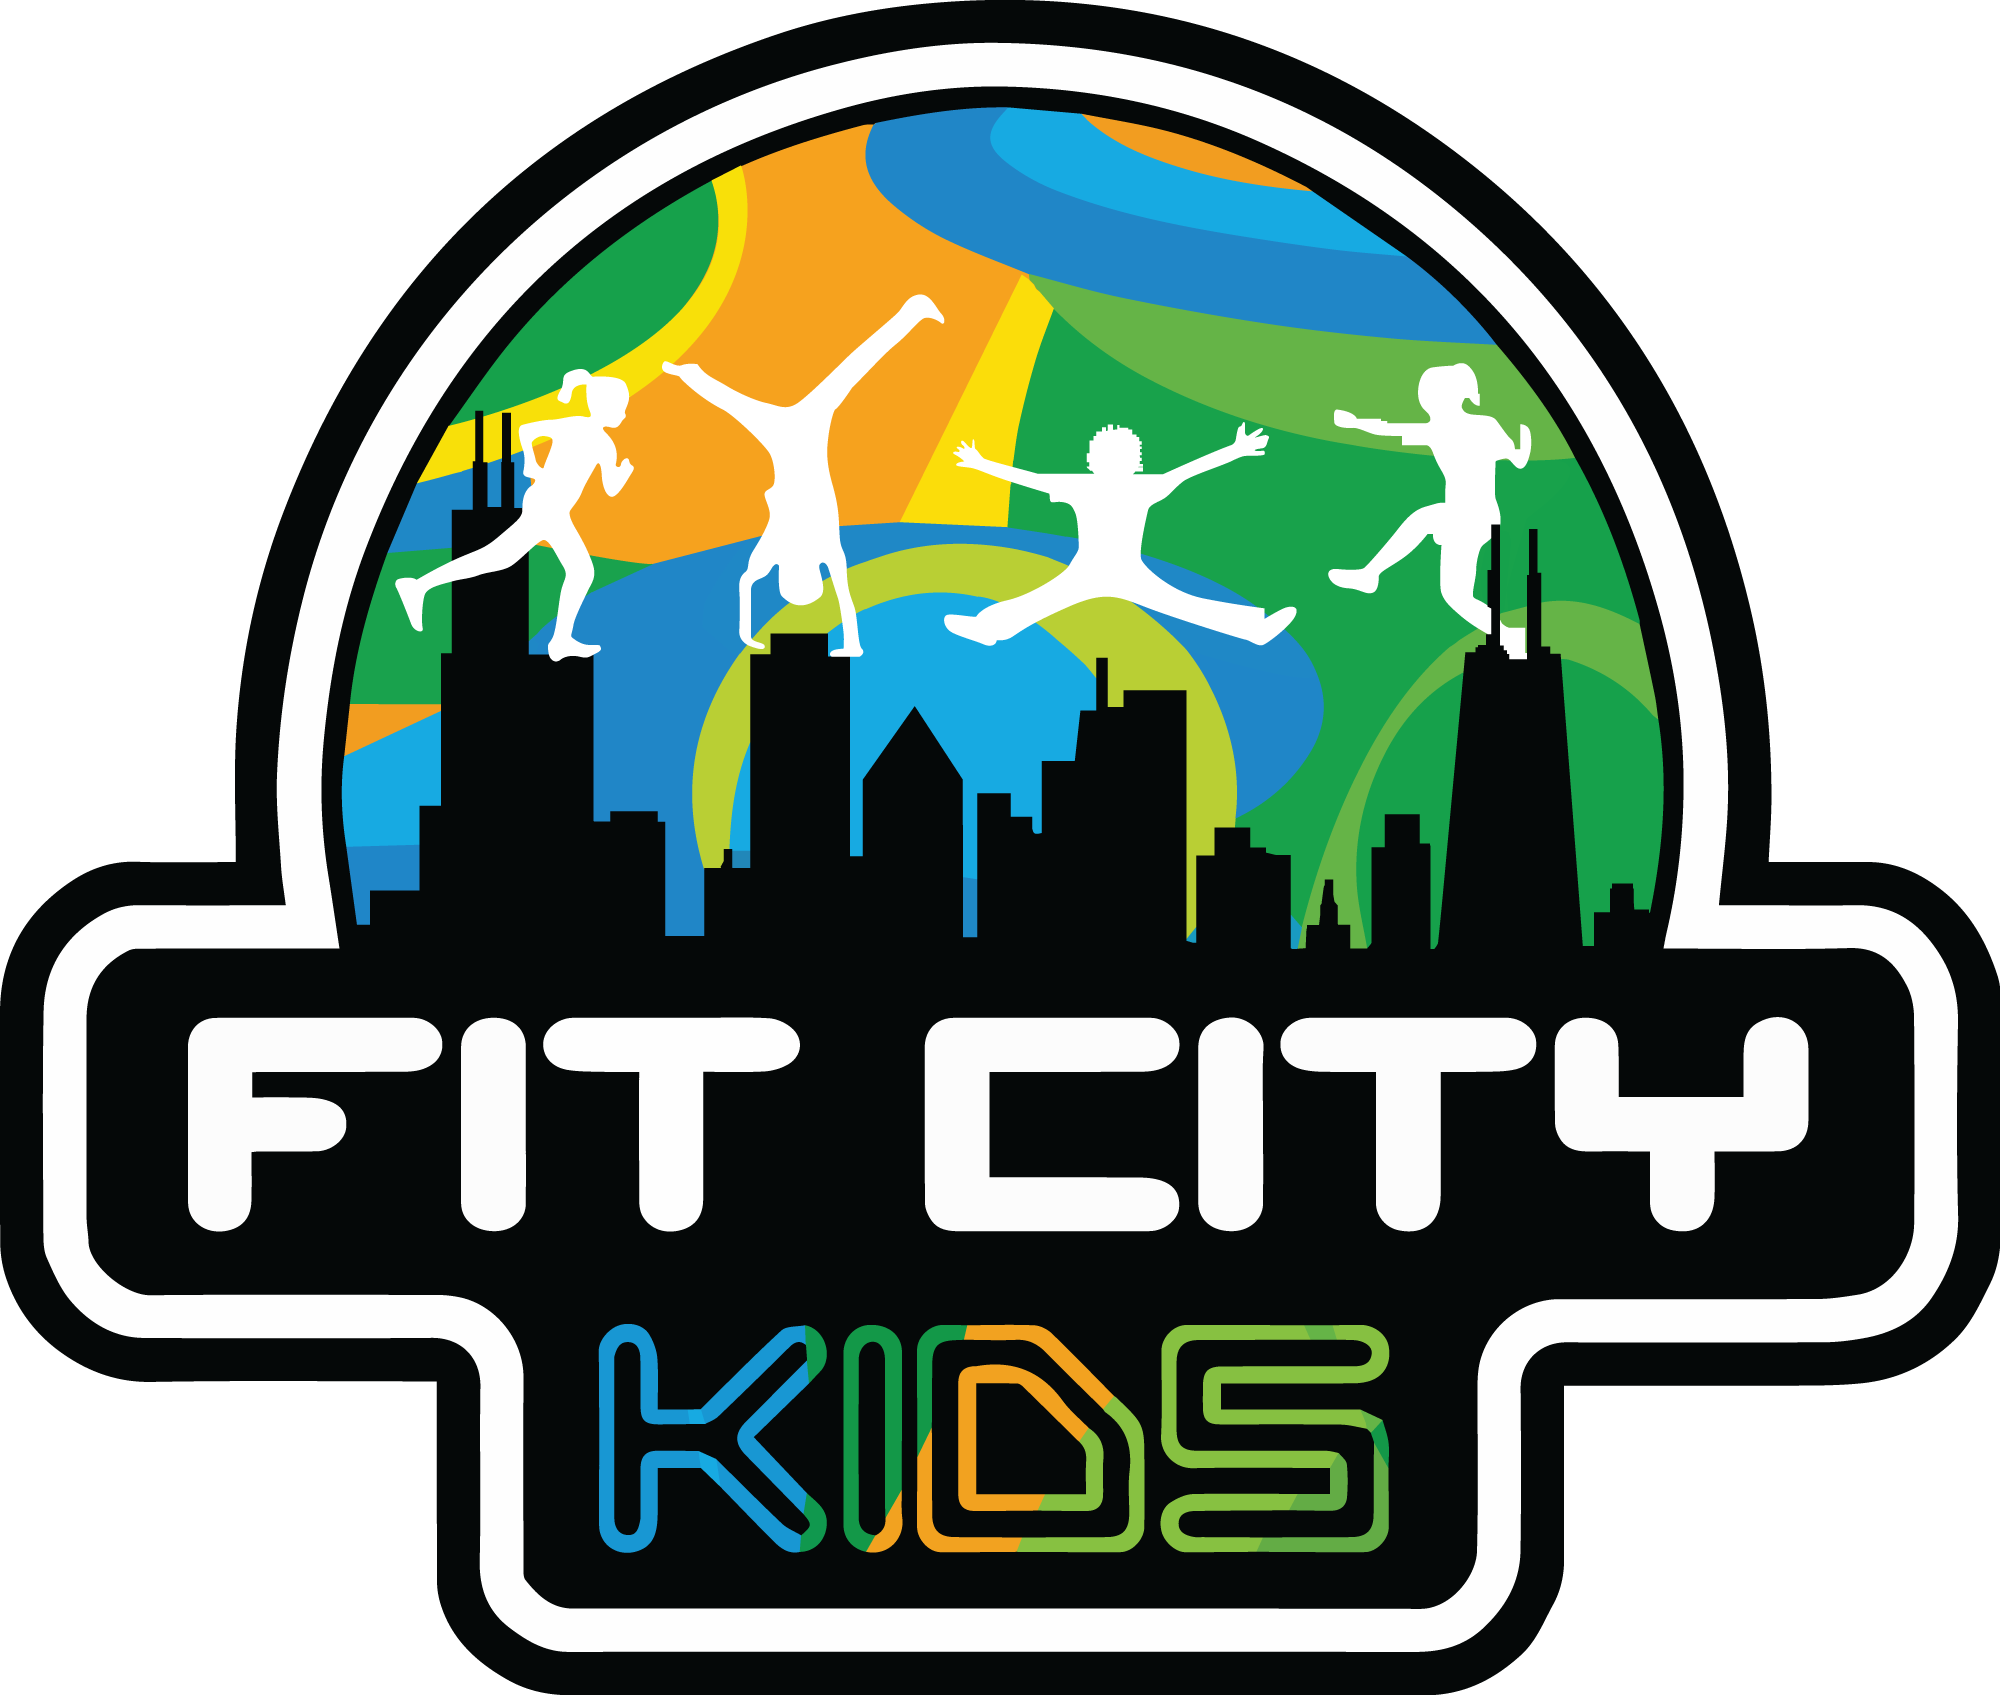 Family Activity Center - Fit City Kids, Chicago IL - Fitness and Fun!